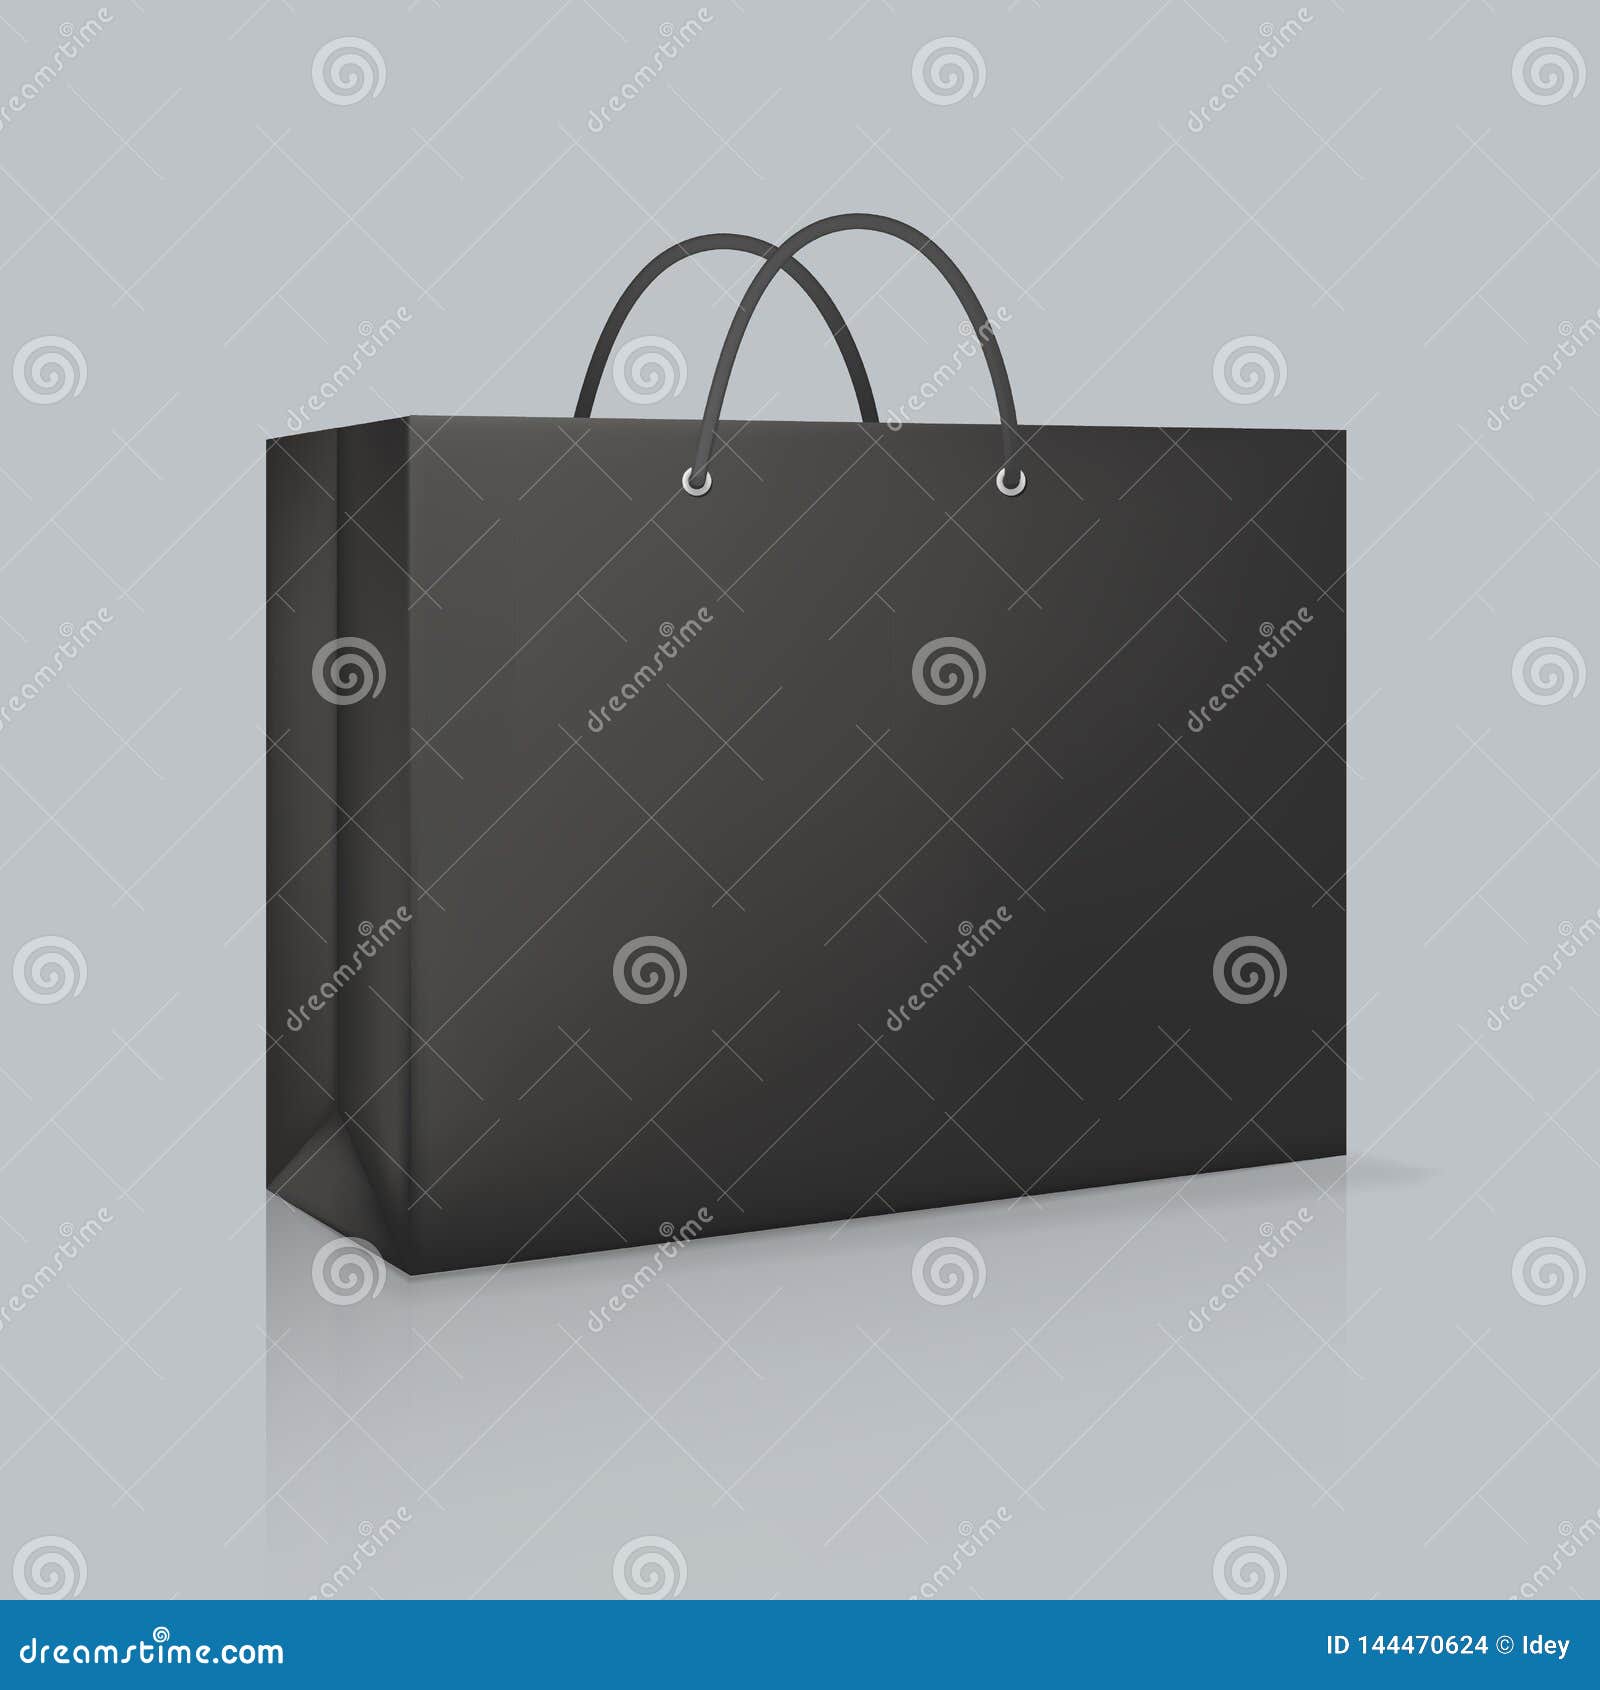 Download Mockup Of Realistic Black Paper Bag. Corporate Identity ...